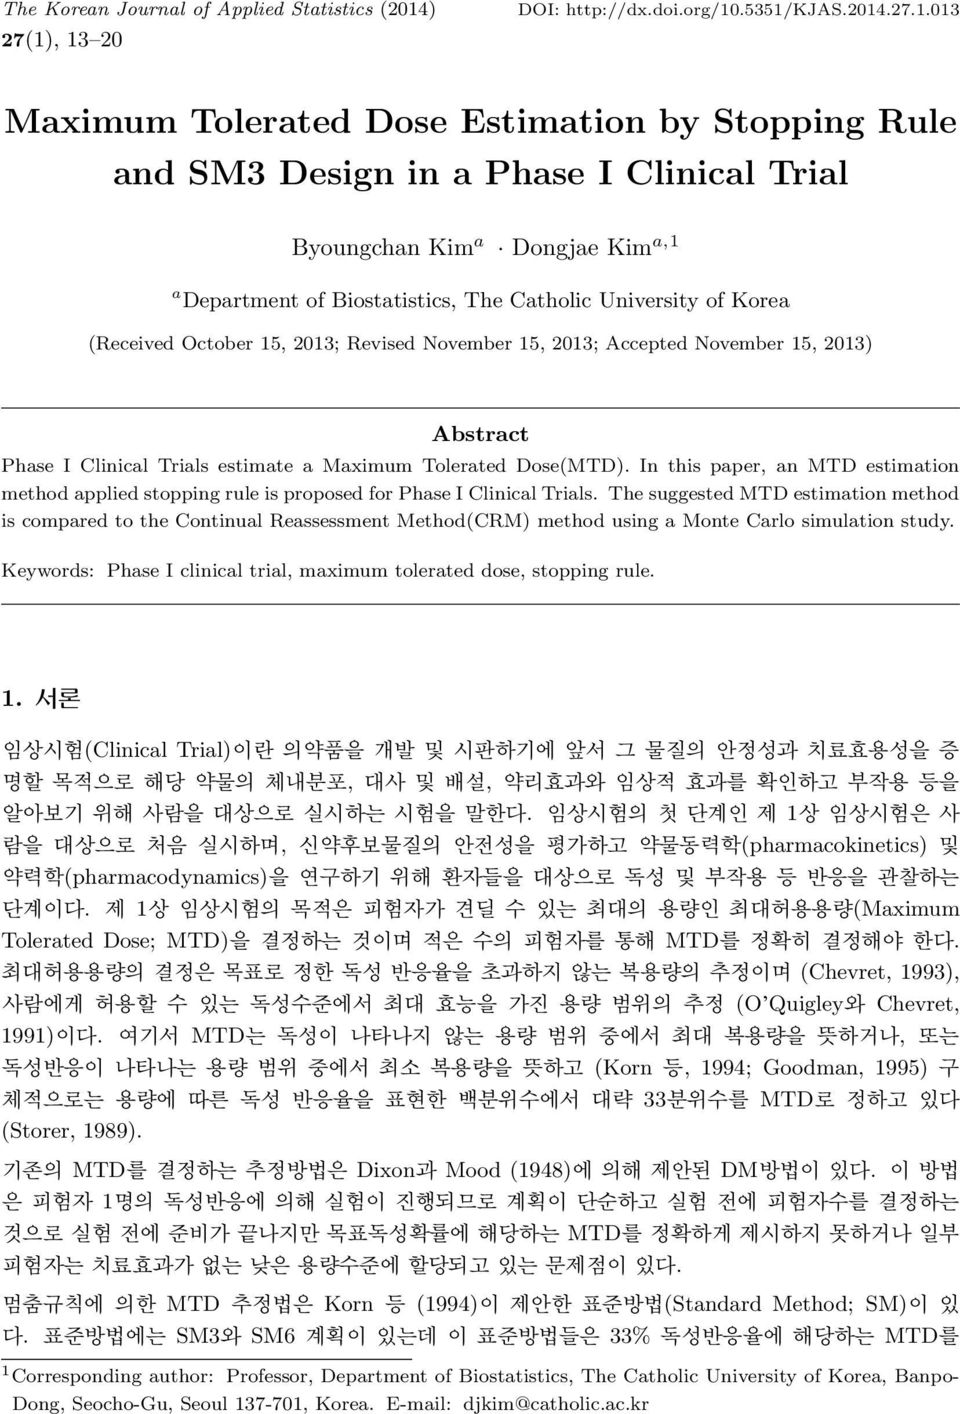 , 13 20 DOI: http://dx.doi.org/10.5351/kjas.2014.27.1.013 Maximum Tolerated Dose Estimation by Stopping Rule and SM3 Design in a Phase I Clinical Trial Byoungchan Kim a Dongjae Kim a,1 a Department